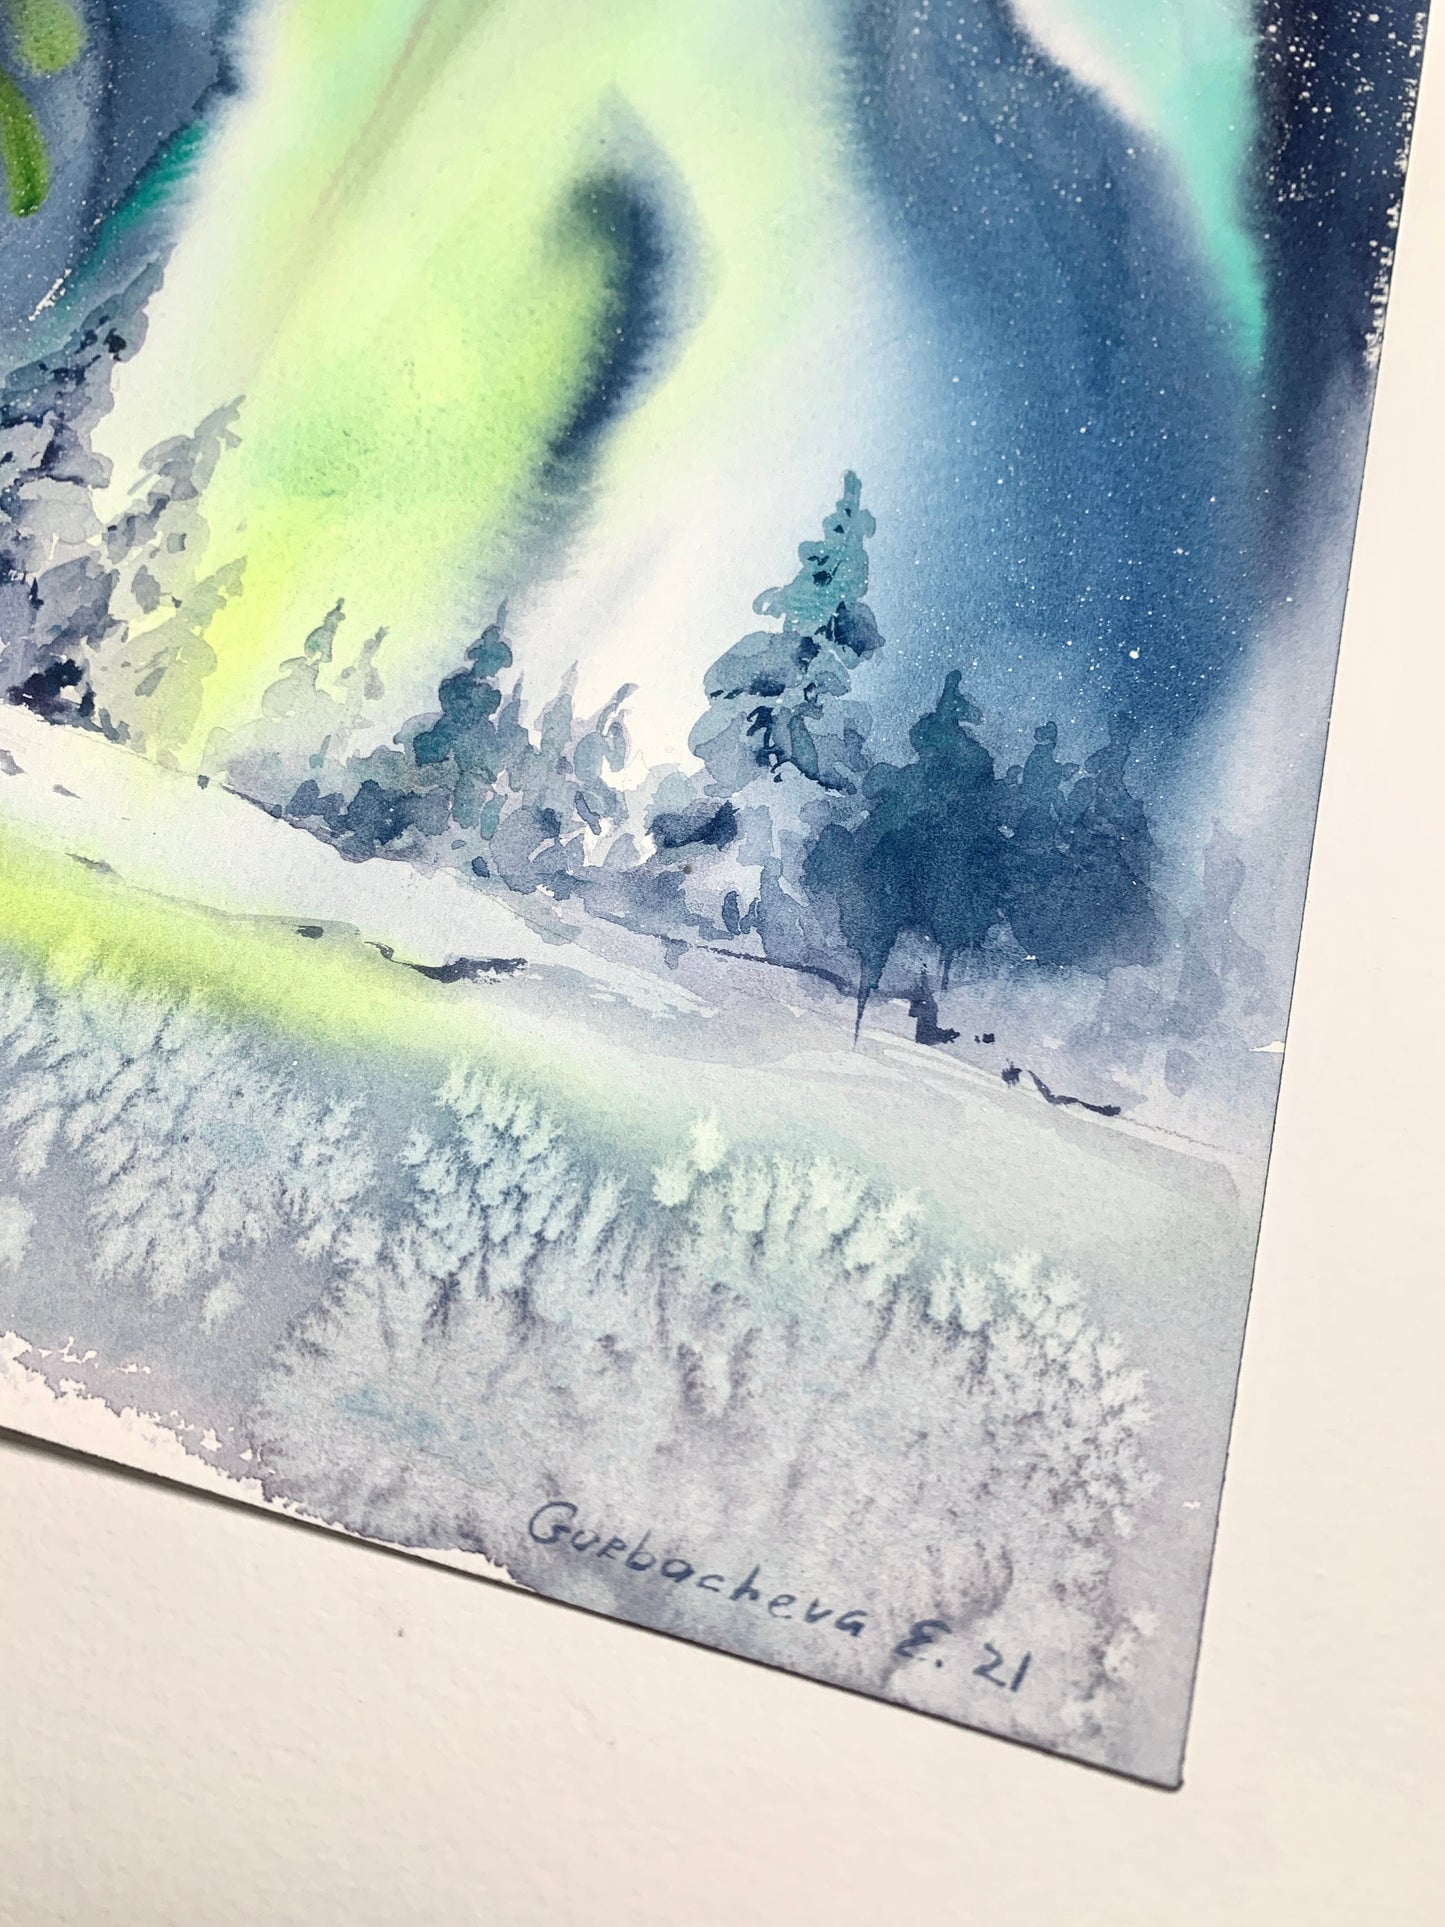 Aurora Borealis Watercolor Painting Original, Nordic Wall Art, Winter Landscape, Northern lights, Ice & Snow, Small Painting, Christmas Gift